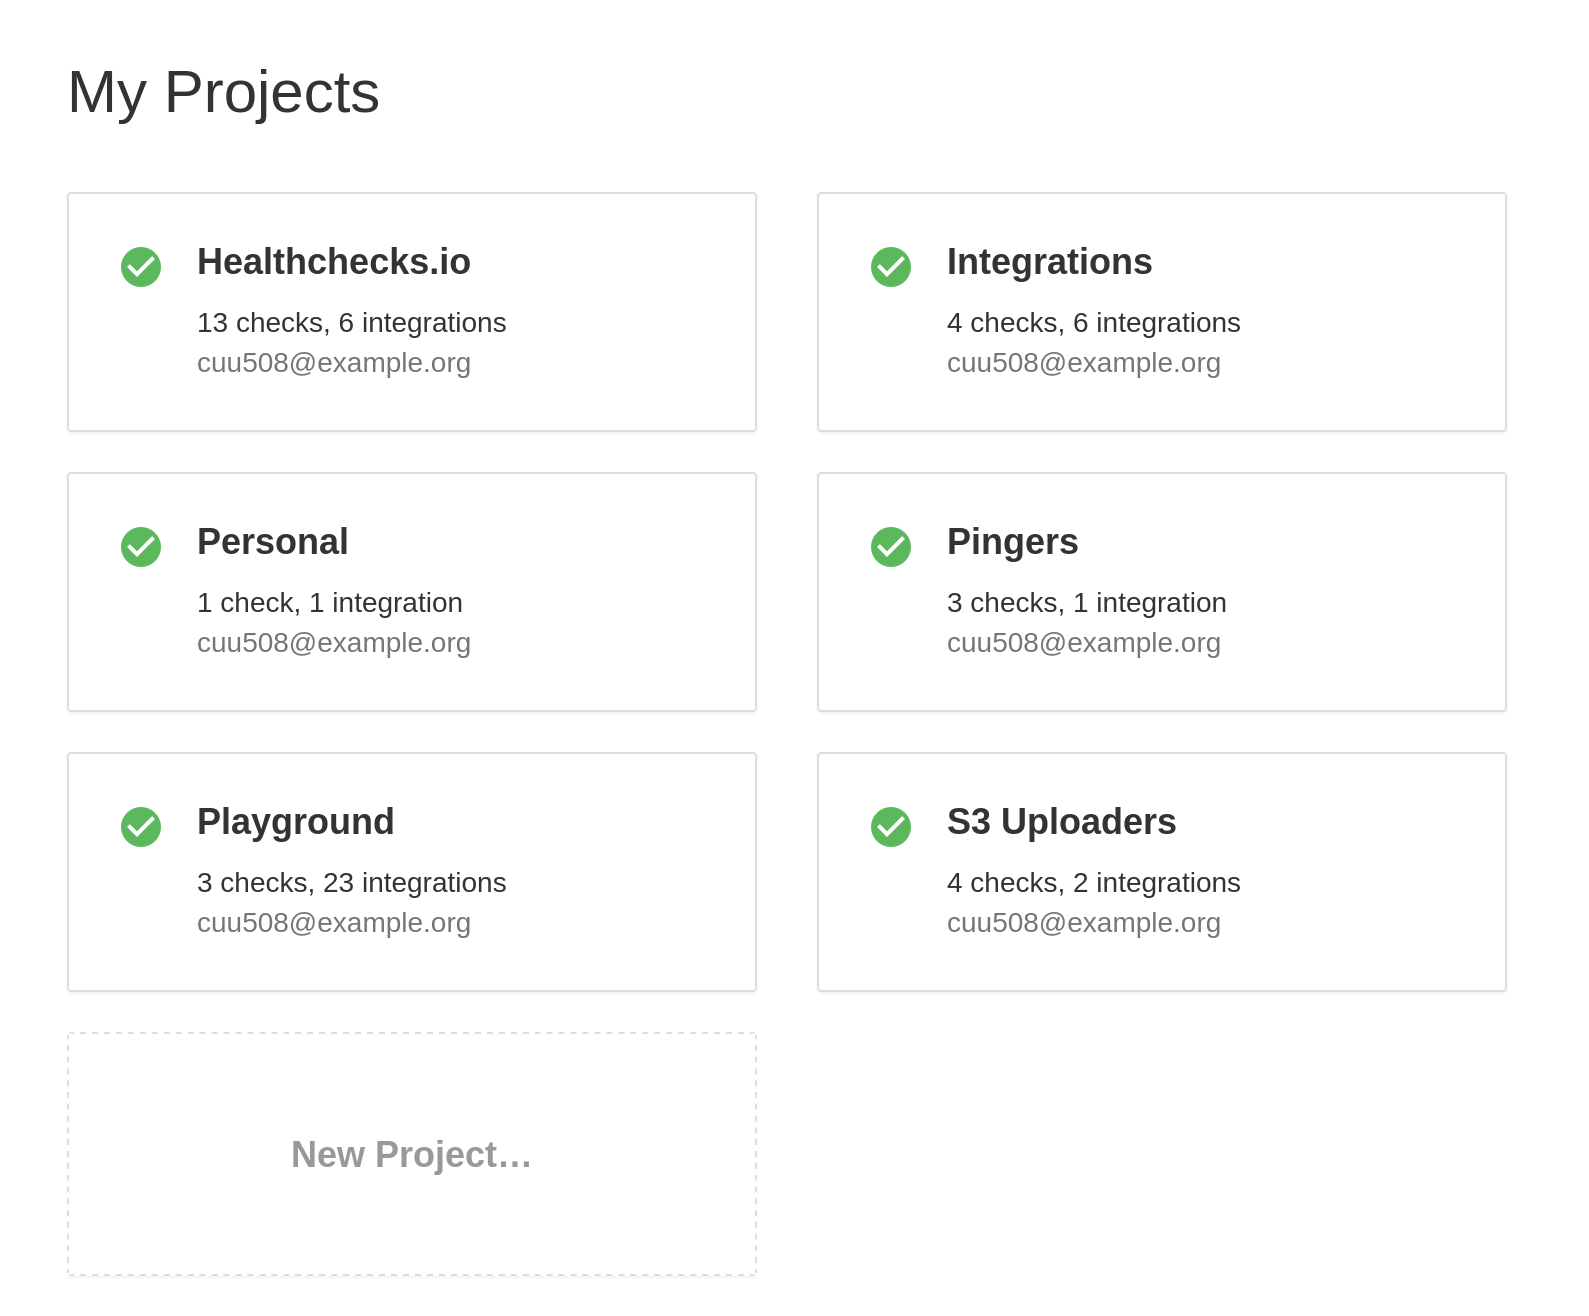 An overview of projects